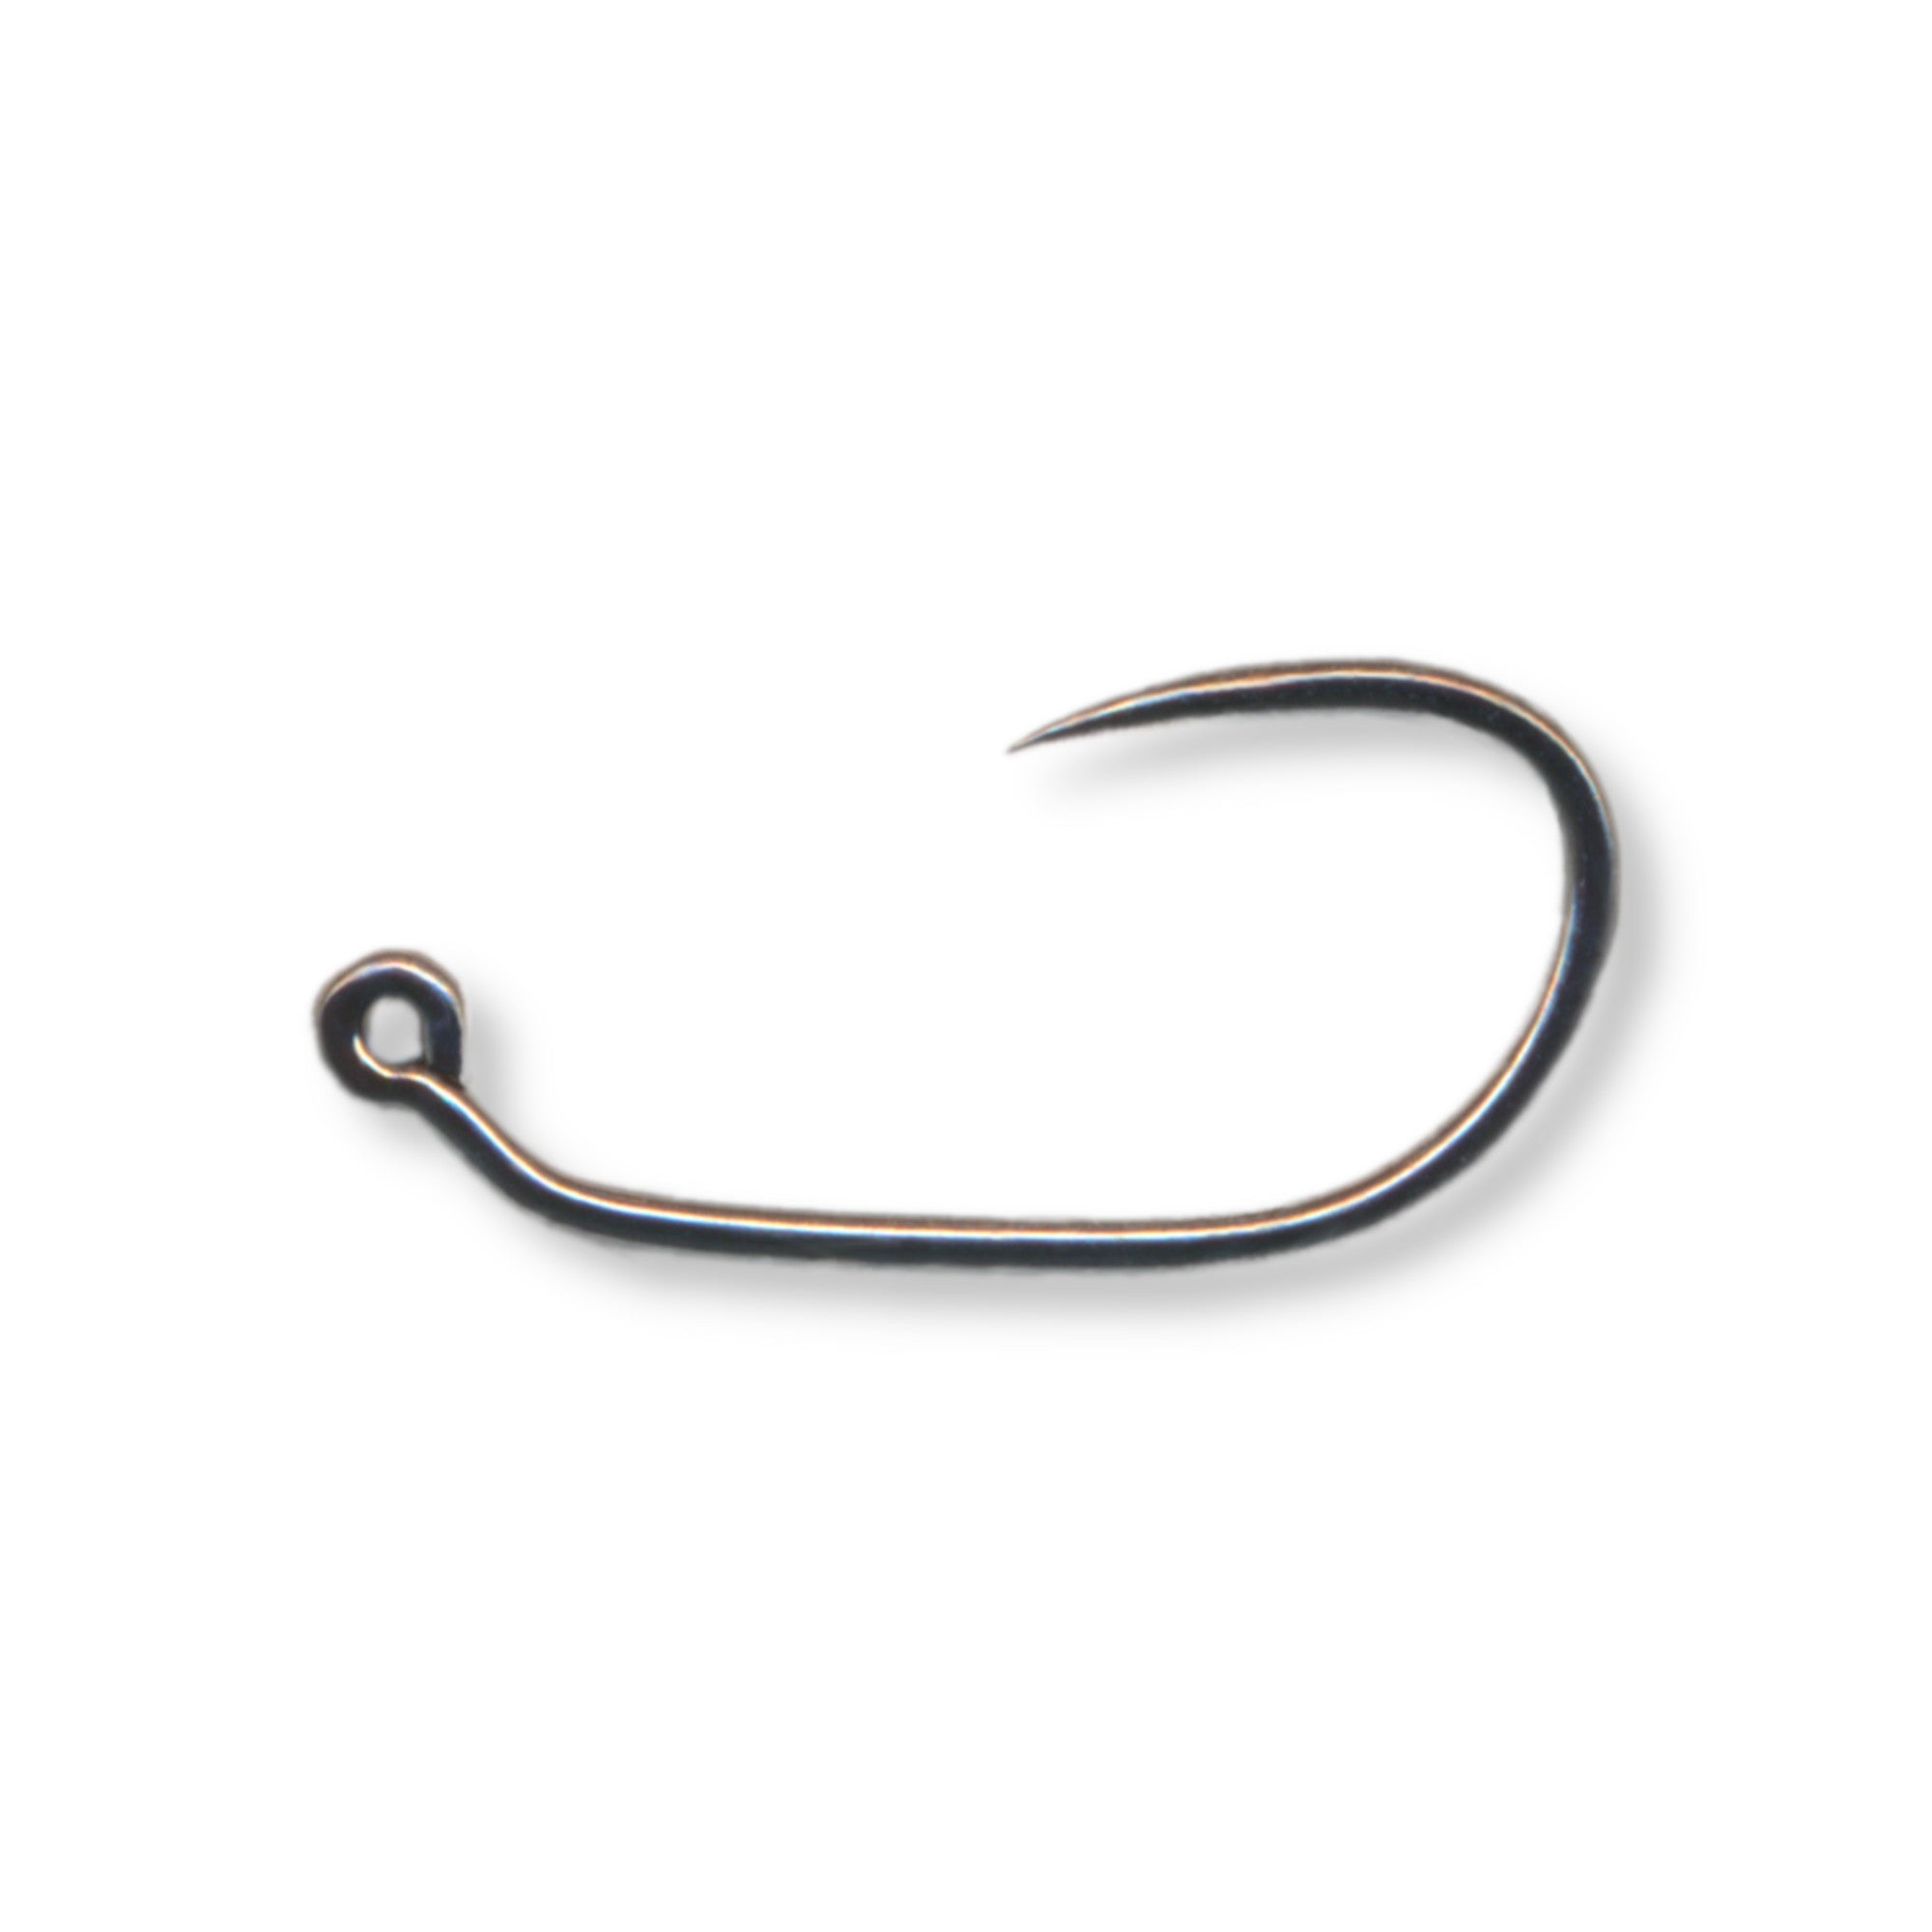 Demmon Competition ST330 Barbless Wave Tip Jig Fly Hooks - 25 pcs -  FrostyFly